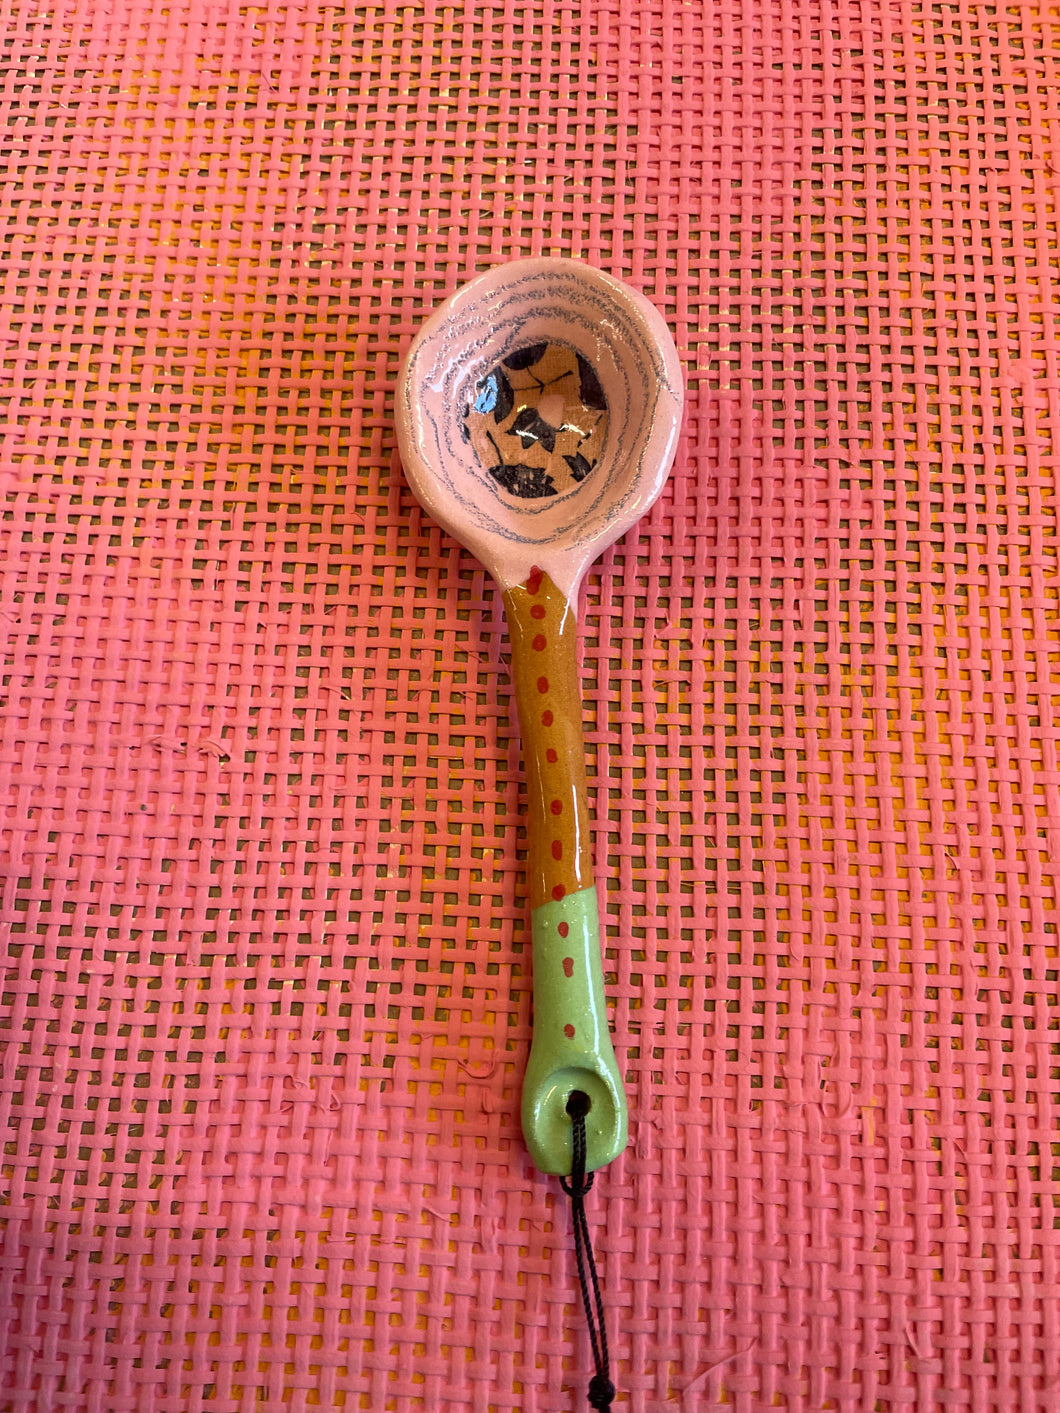 Decorative spoon pink and green.